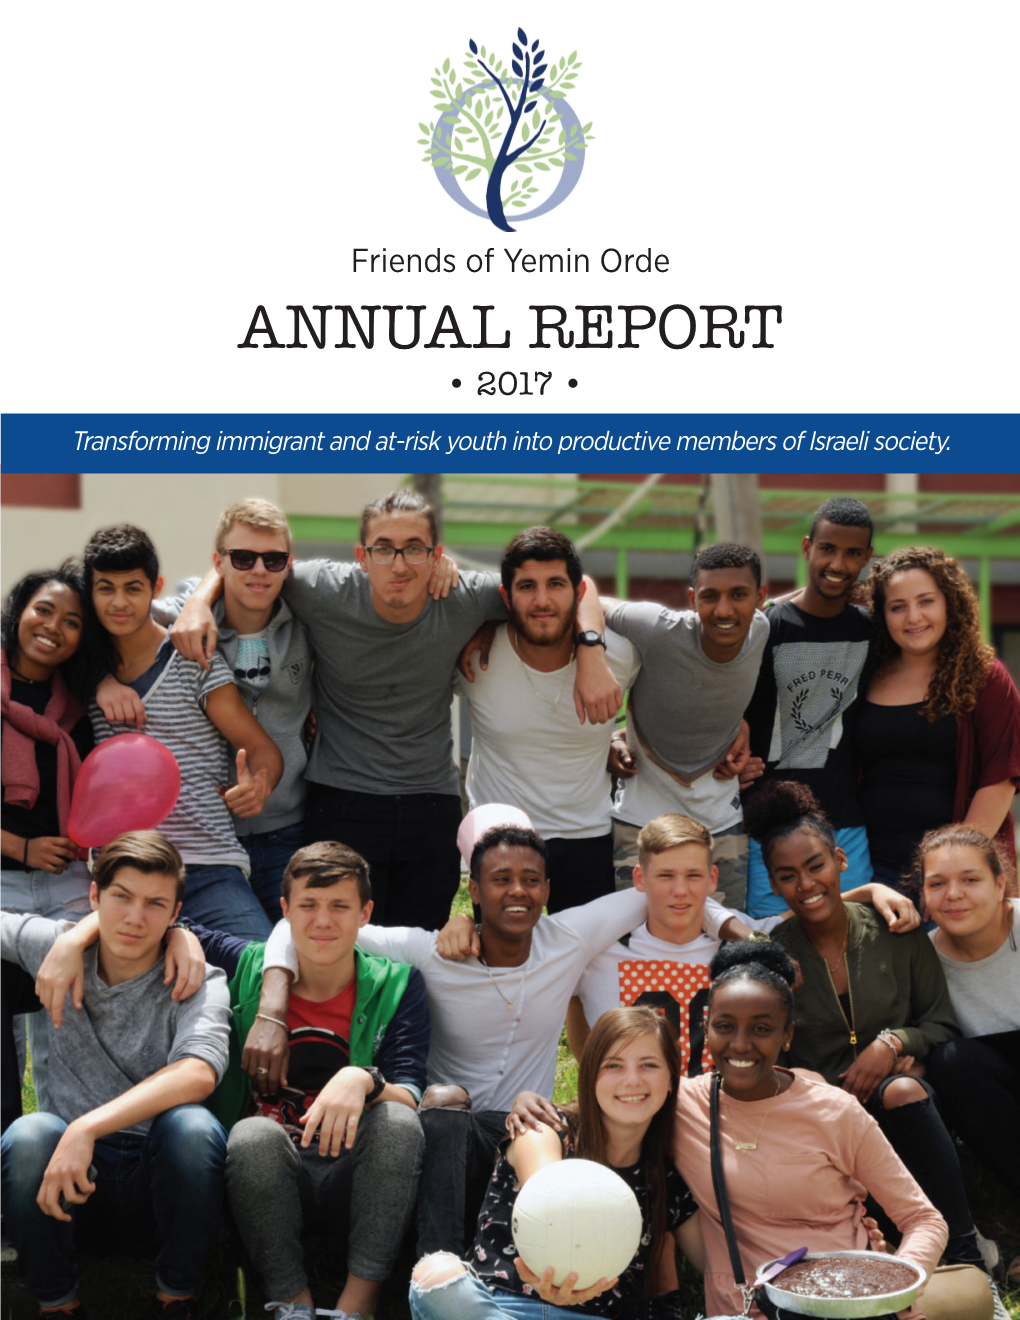 ANNUAL REPORT • 2017 • Transforming Immigrant and At-Risk Youth Into Productive Members of Israeli Society